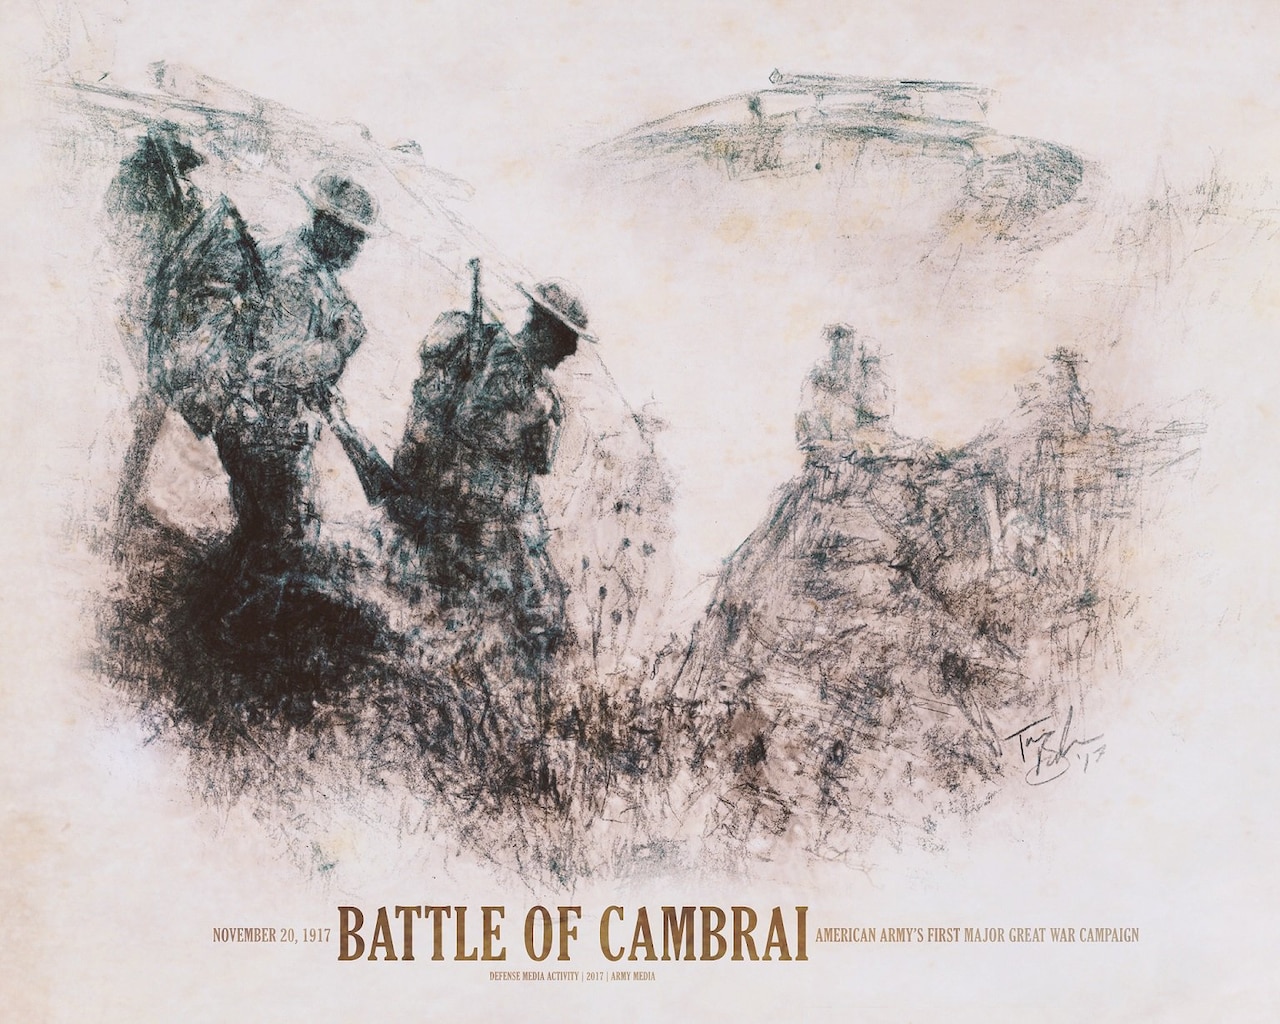 The 100th anniversary of the Battle of Cambrai in France falls on Nov. 20, 2017. The battle was the Army’s first major campaign in World War I and the first effective large-scale use of combined arms. DoD illustration by Travis Burcham